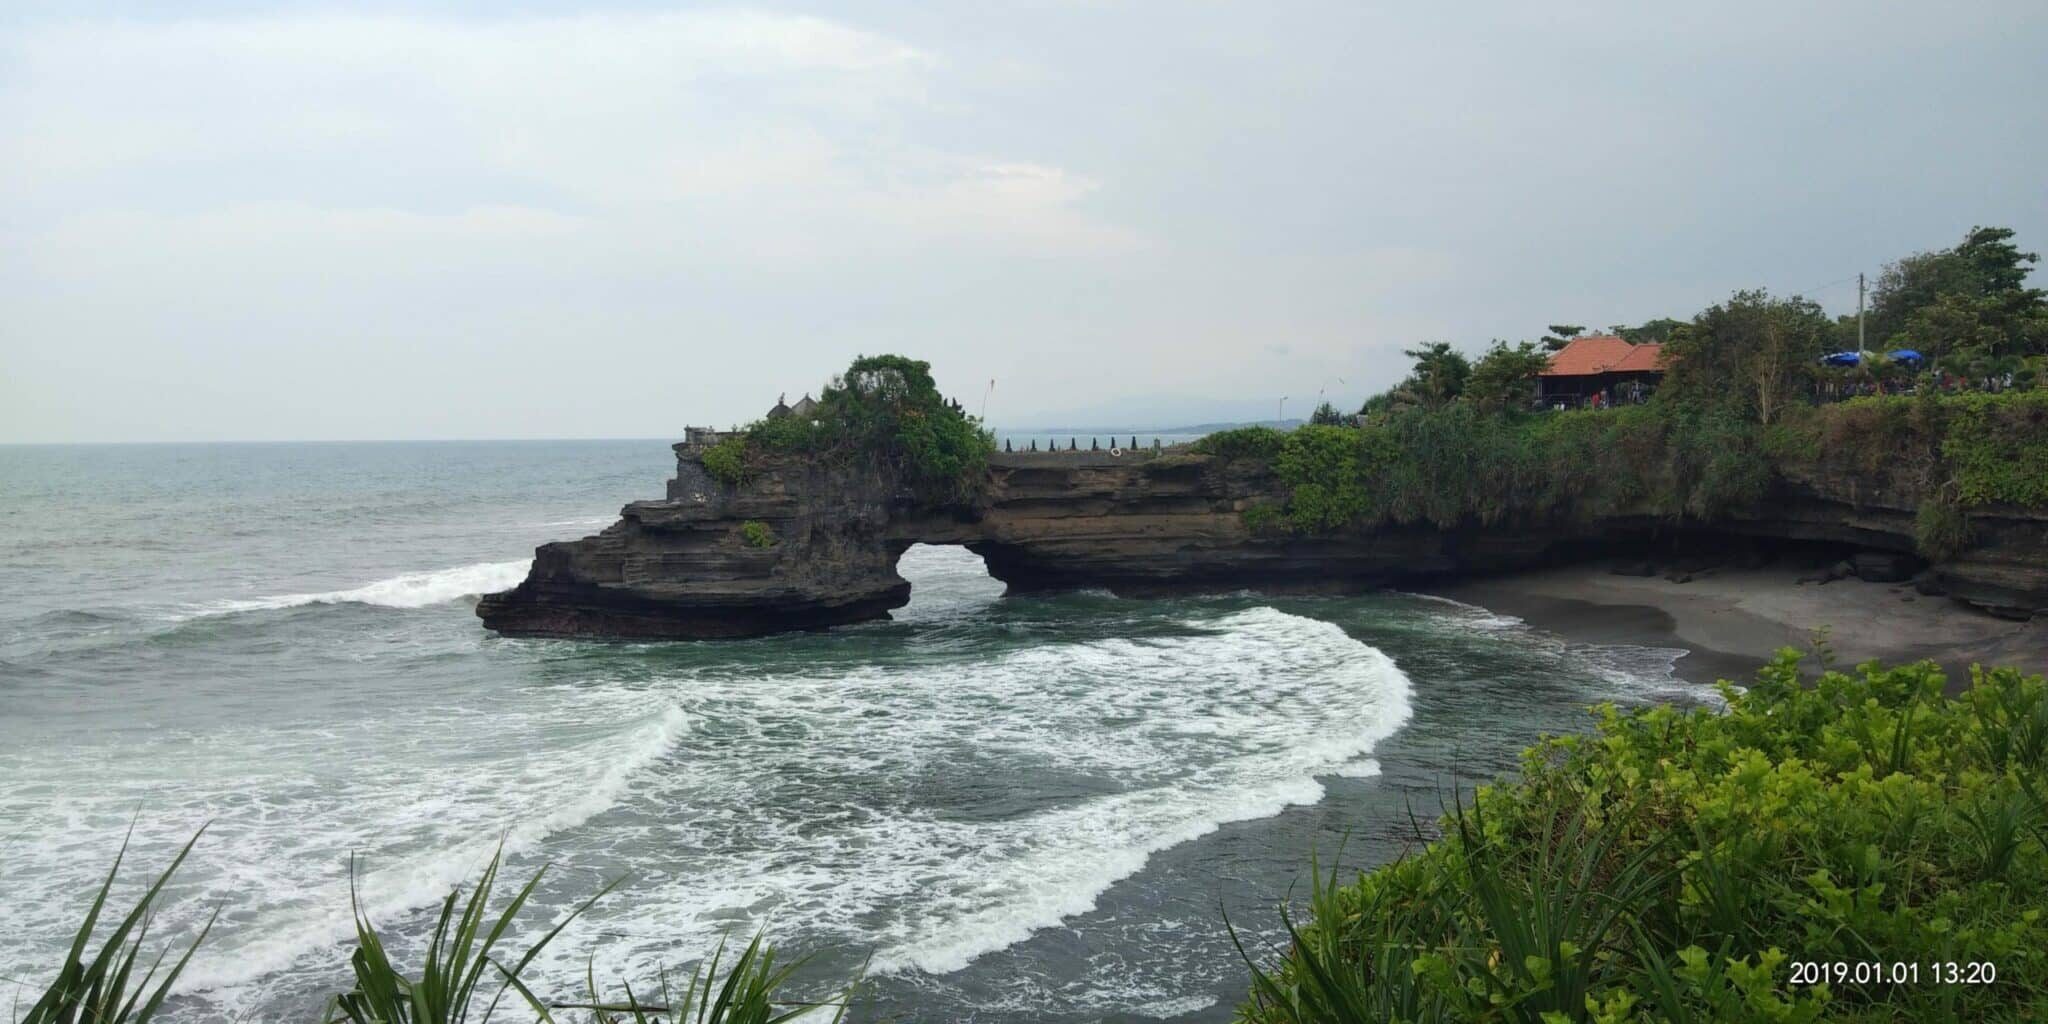 The Sound Of The Waves – Bali (Part 3)